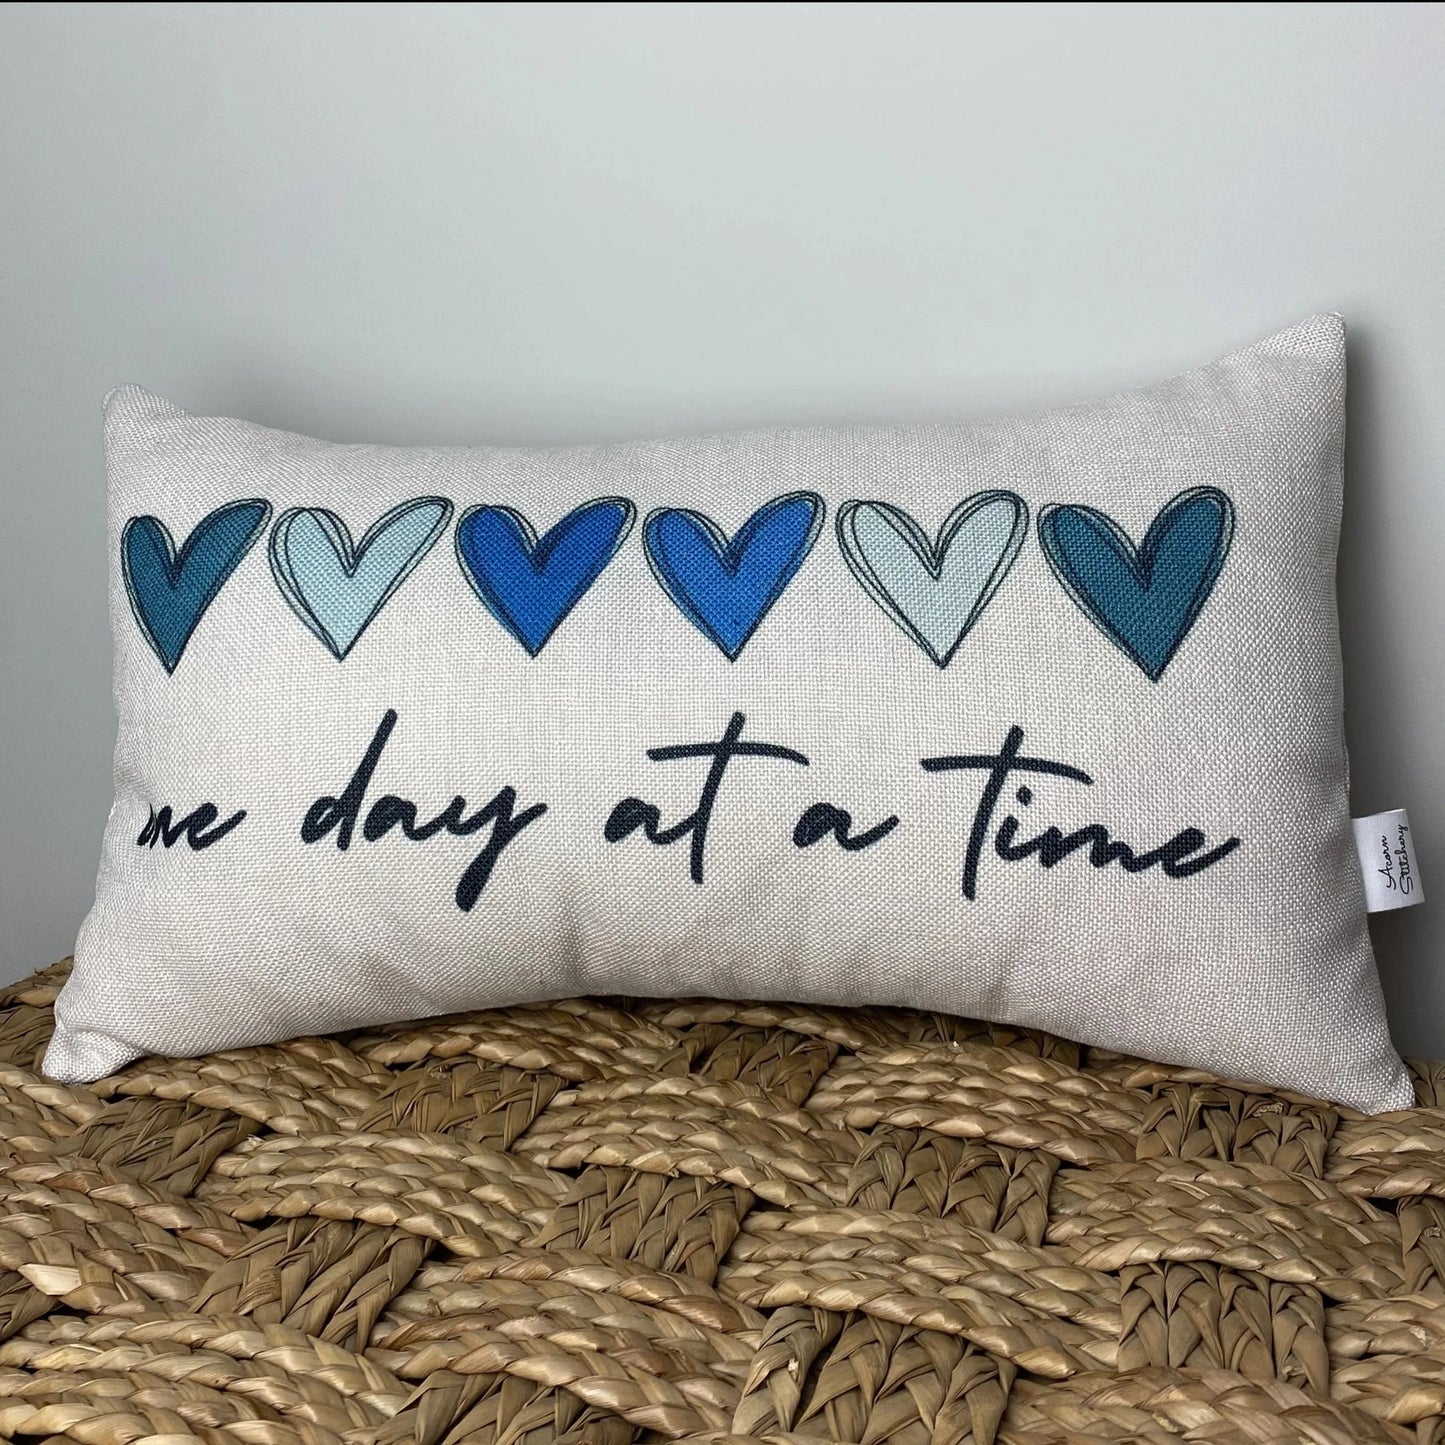 One Day At A Time pillow 12" x 20"